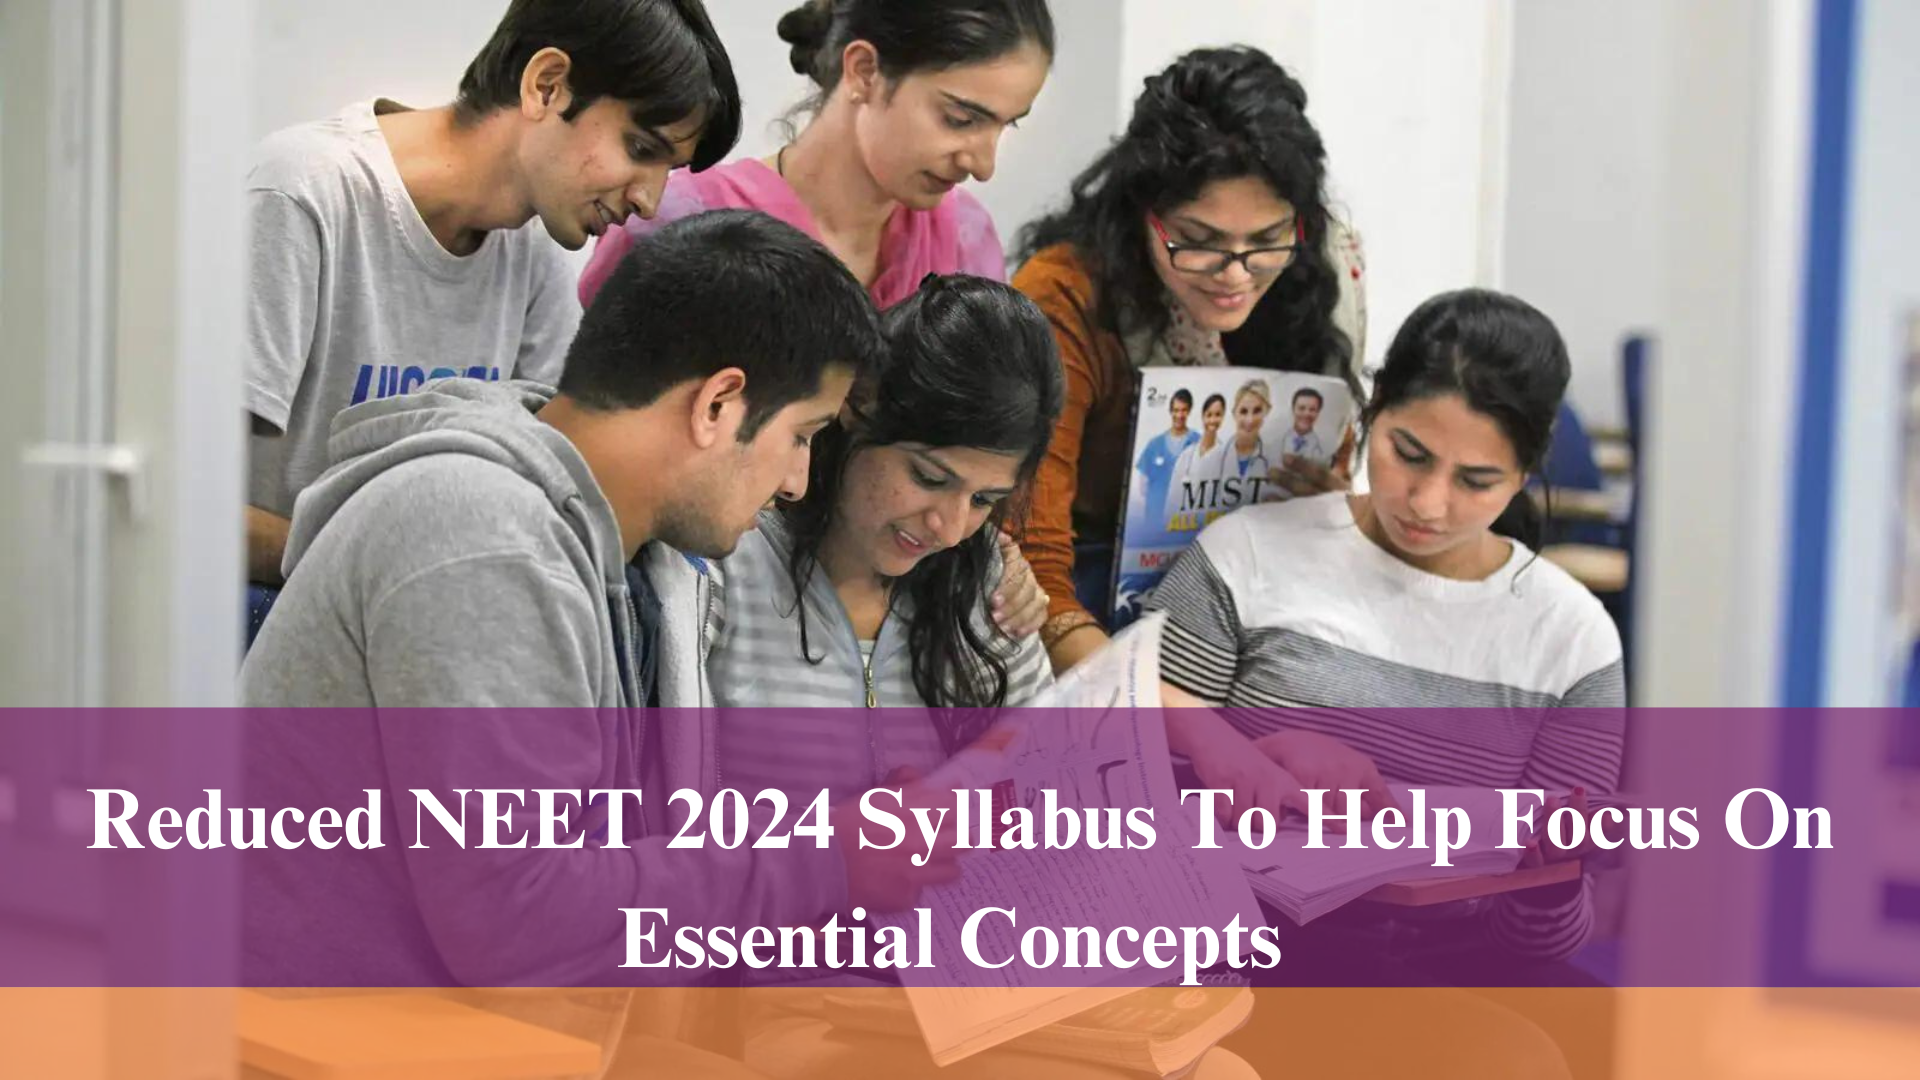 Reduced NEET 2024 Syllabus To Help Focus On Essential Concepts